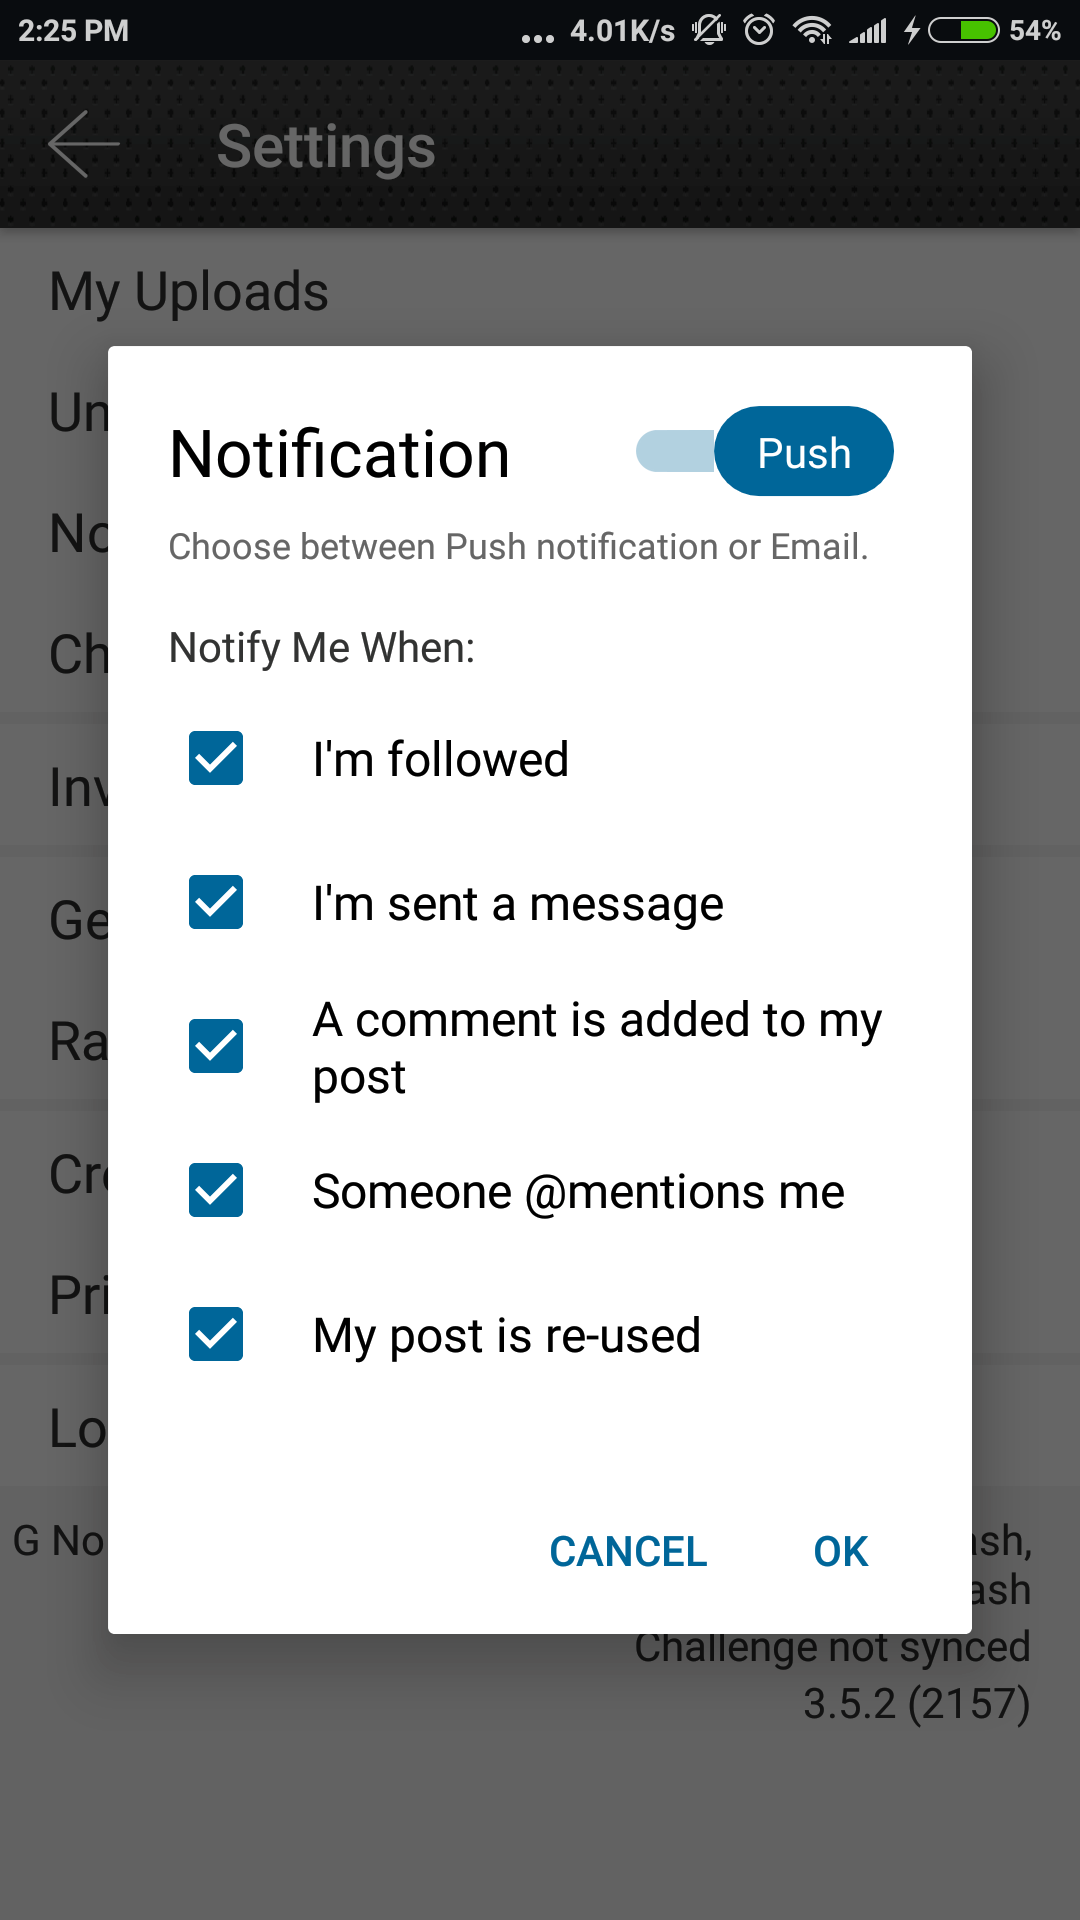 Email or Push Notification